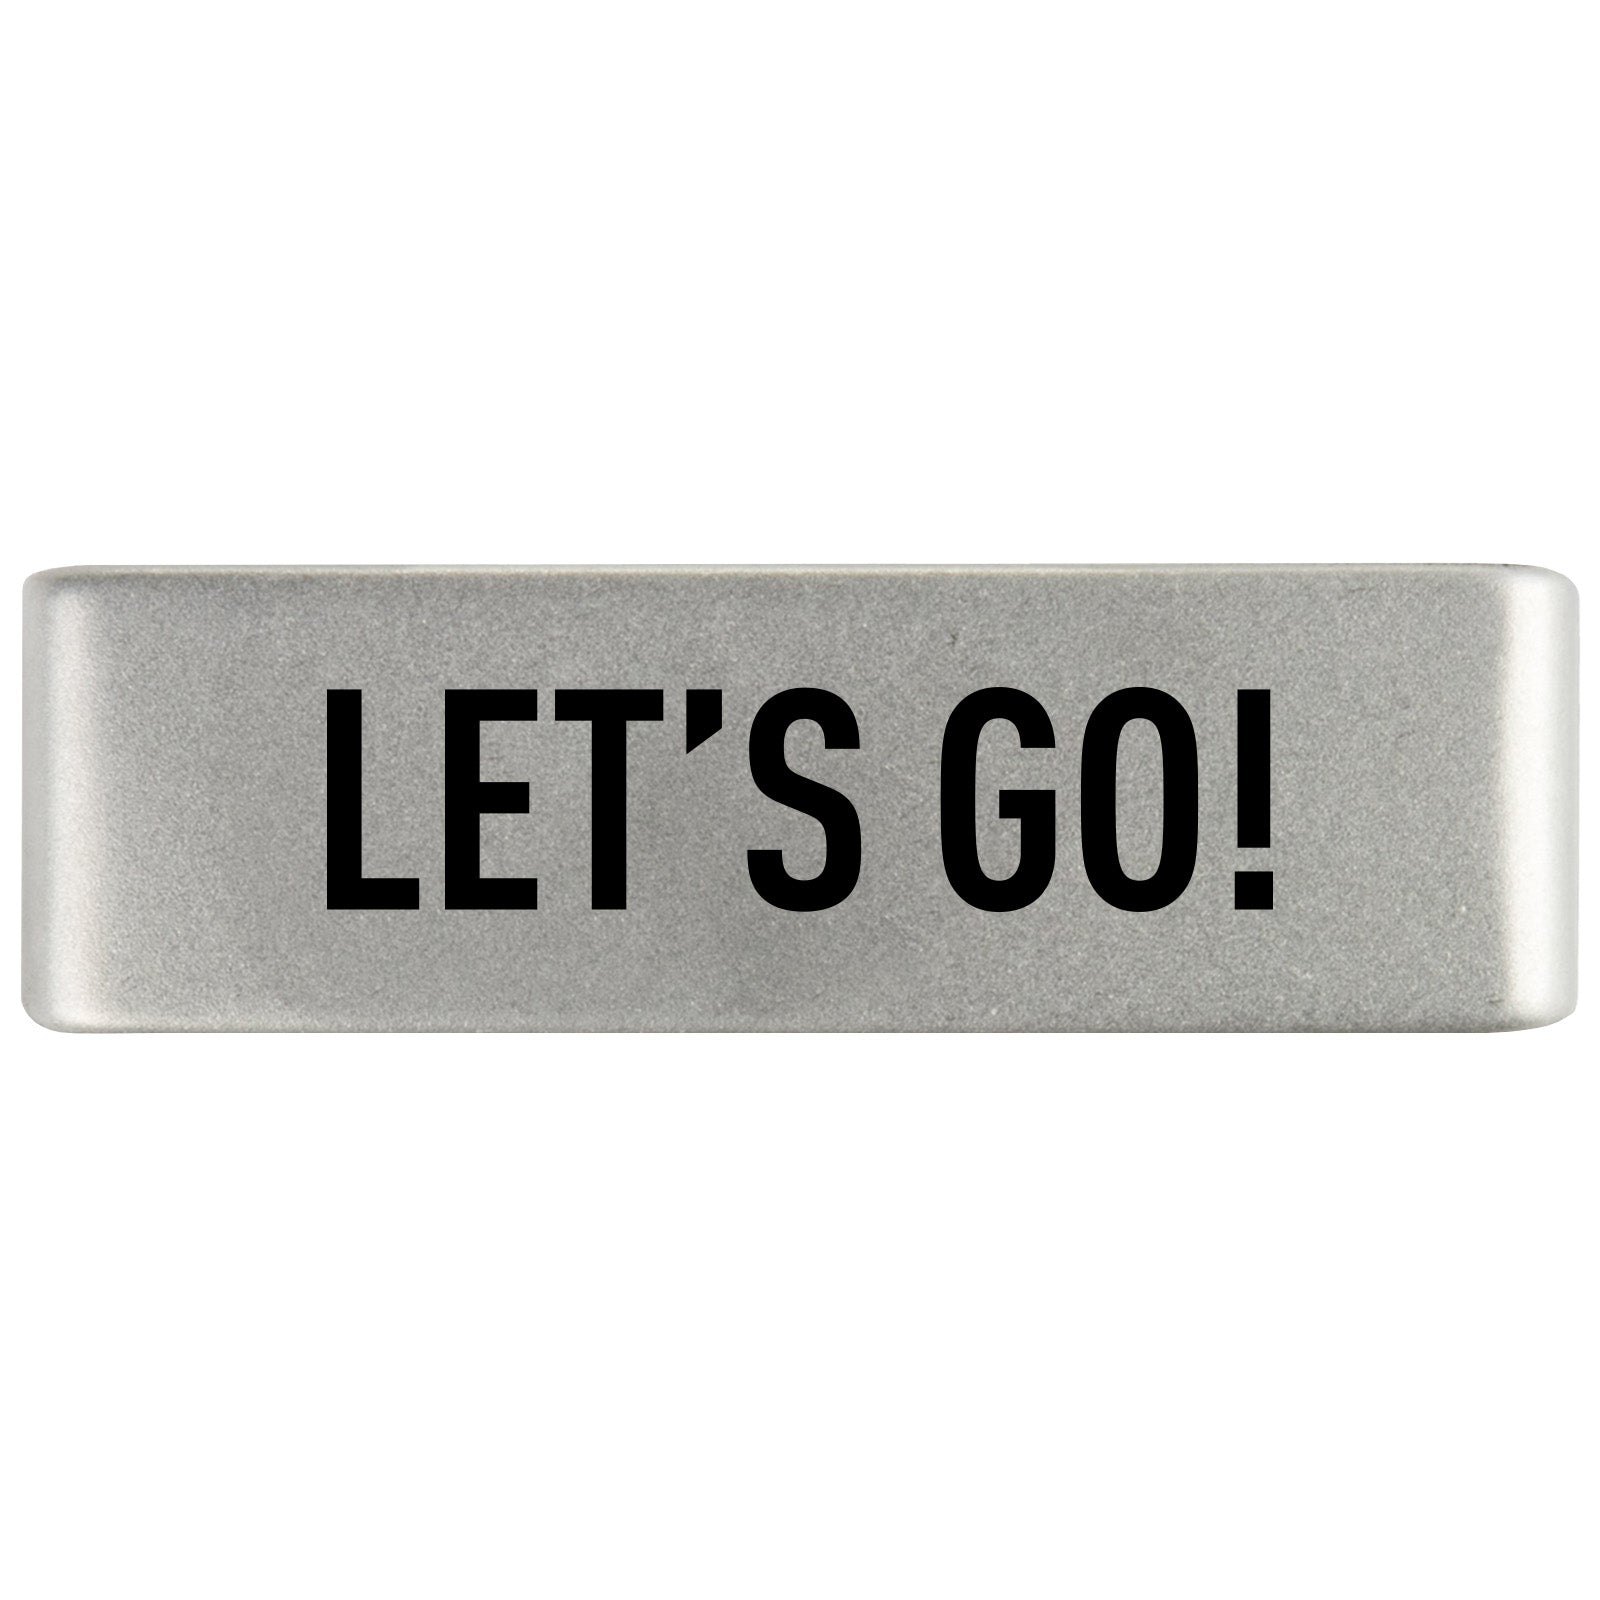 Let's Go Badge Badge 19mm - ROAD iD